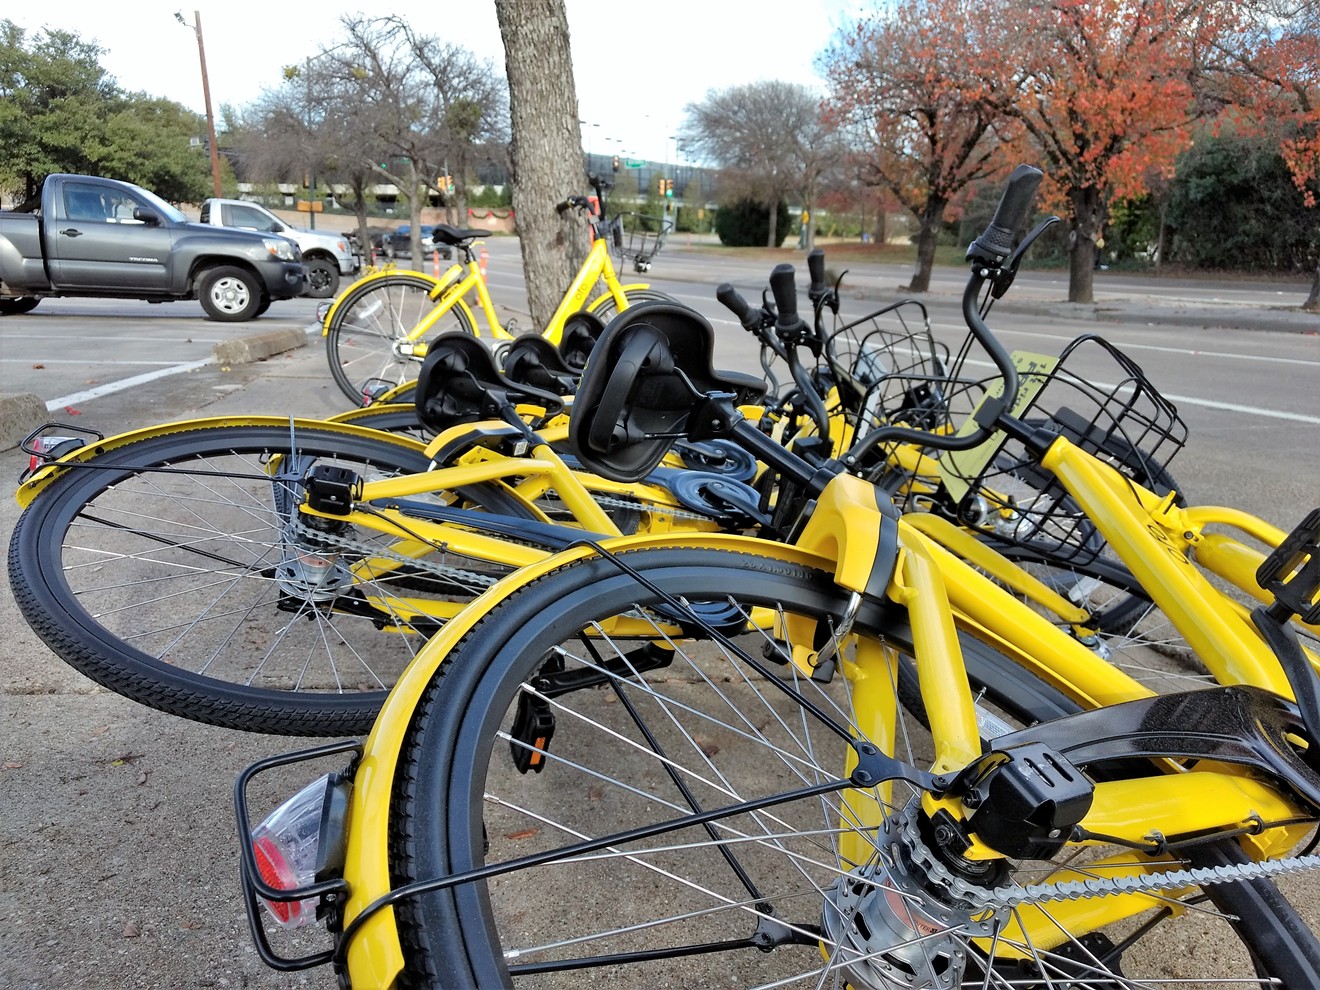 Bike-share companies will have to pick up fallen bikes within two hours if reported during the day and 12 hours if reported overnight.